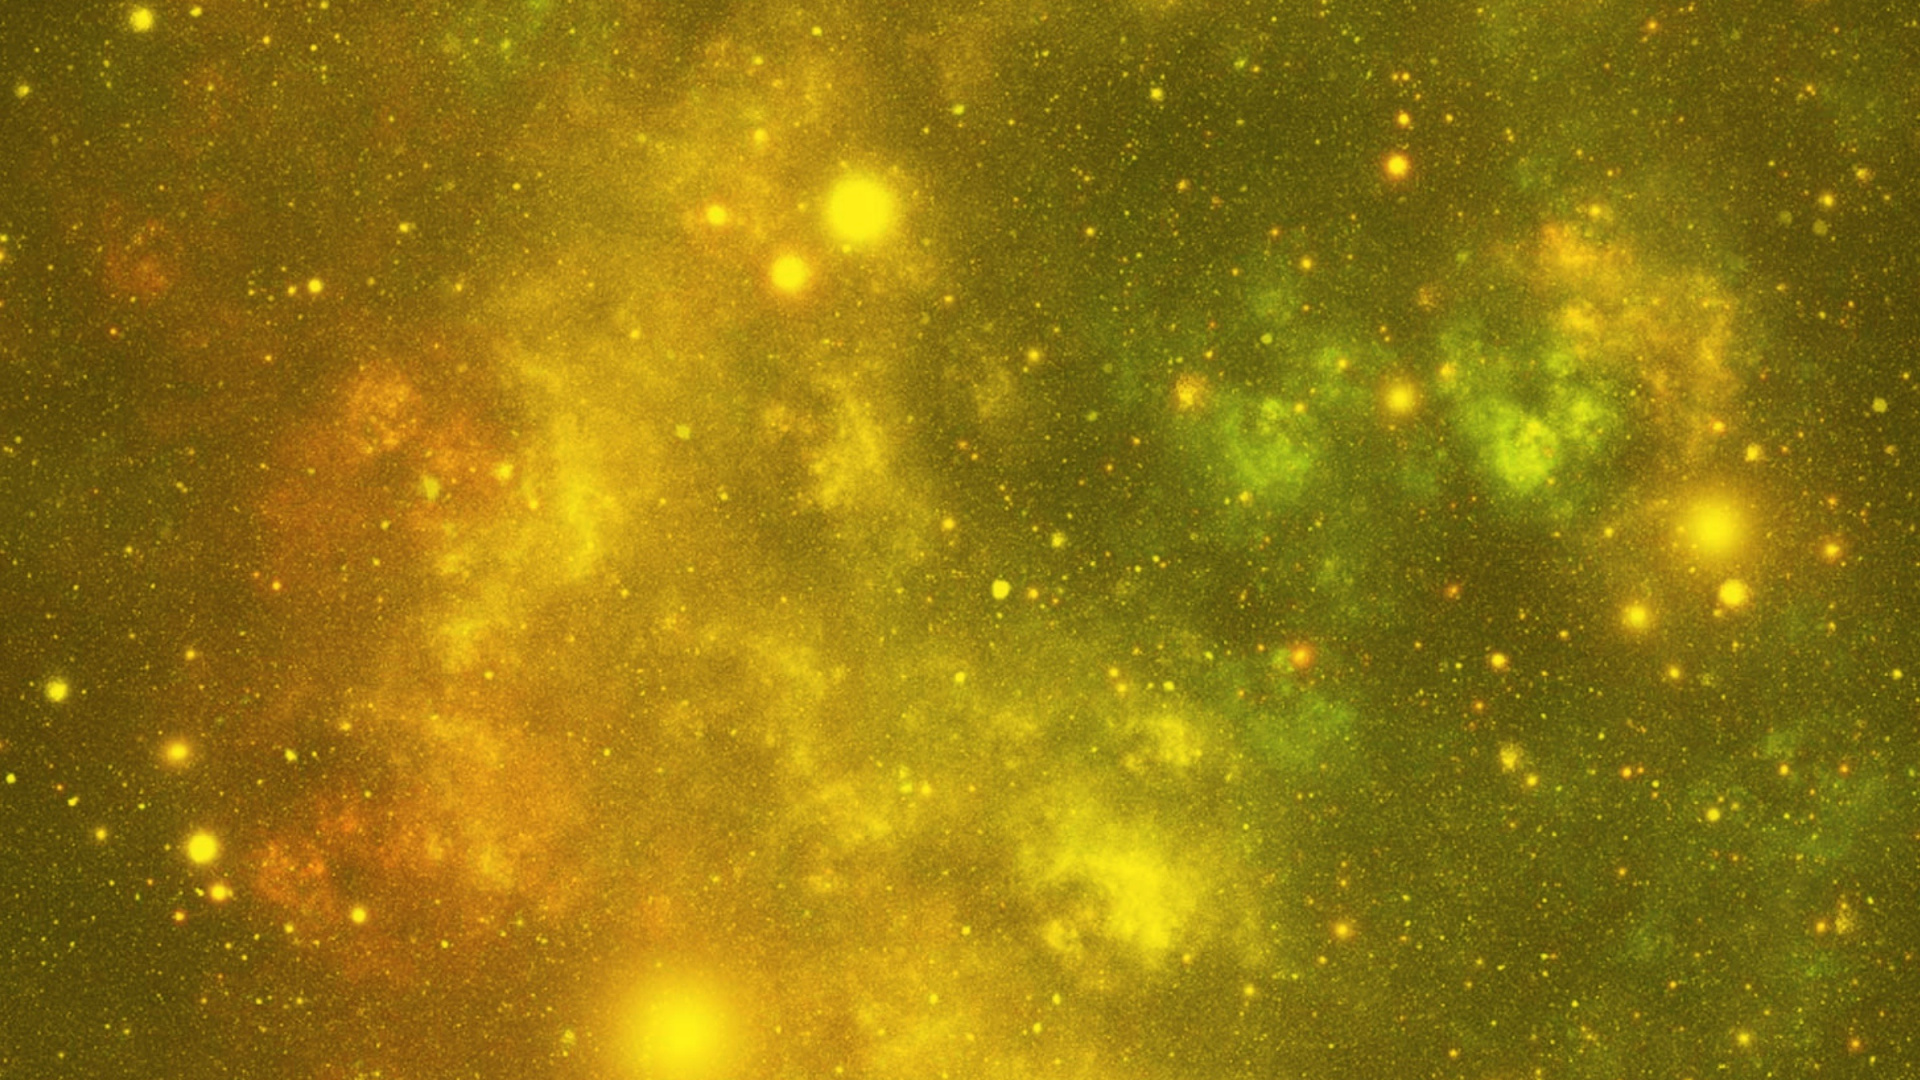 Green and Yellow Stars in The Sky. Wallpaper in 1920x1080 Resolution